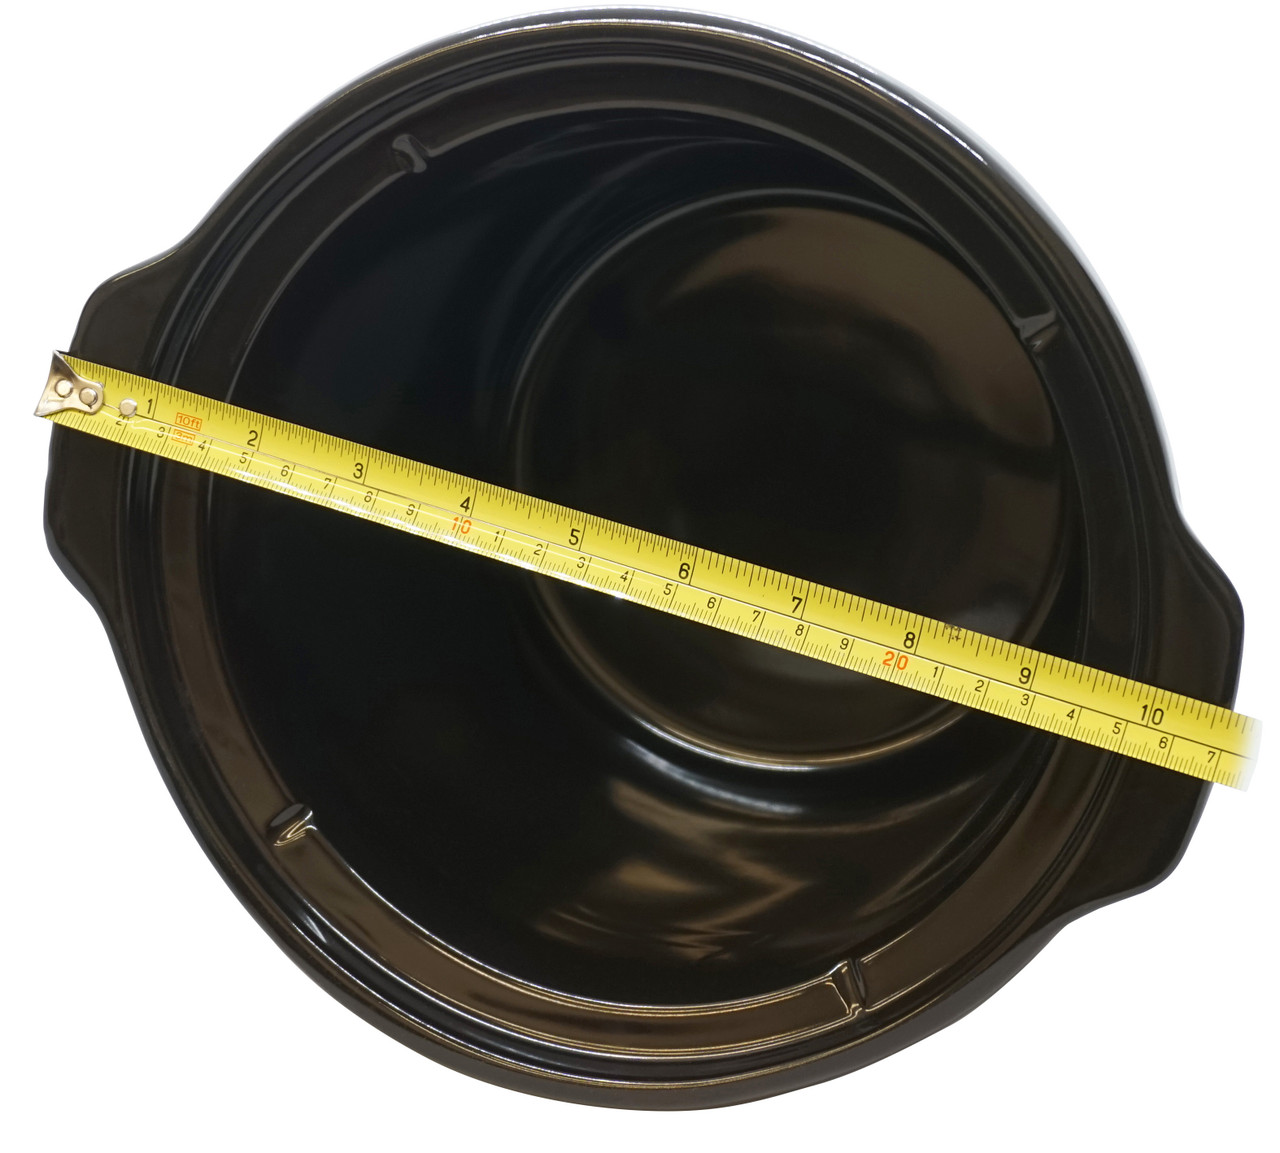 Replacement For Compatible With 6 Qt Black Stoneware fits Crock-Pot Slow  Cooker, 179448-000-000